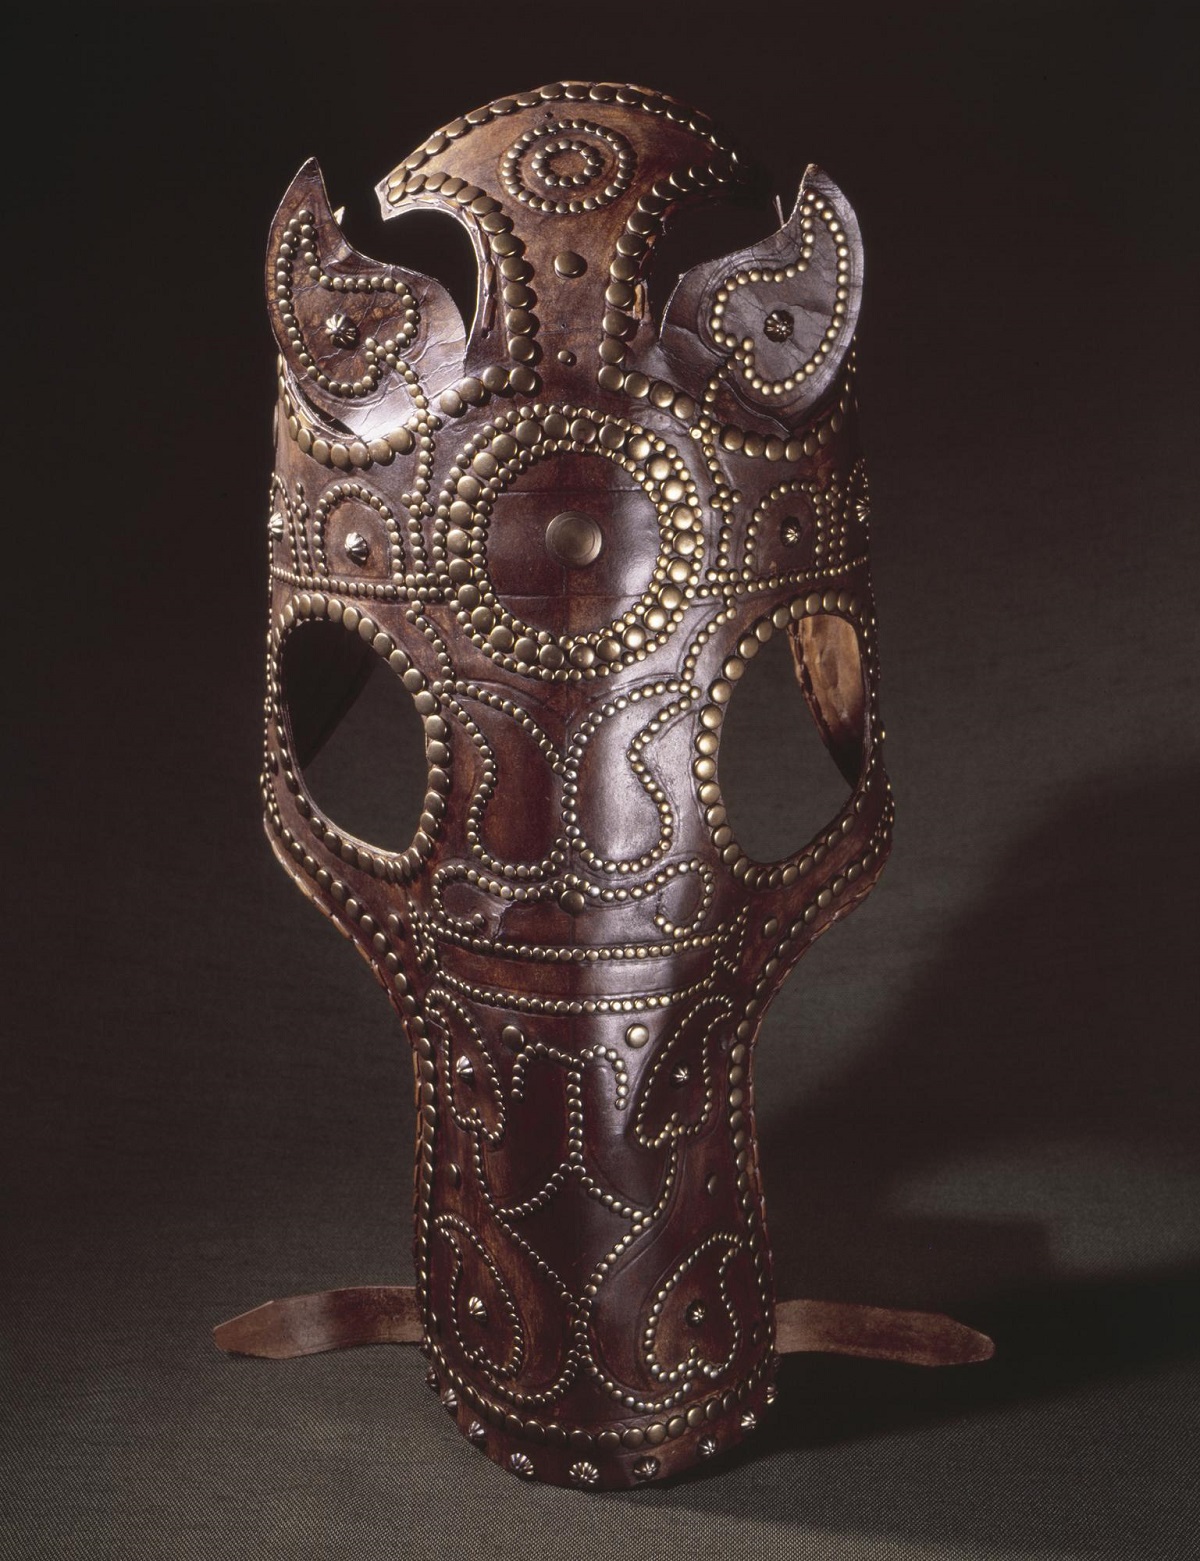 Red-brown leather chamfron or horse's face covering positioned upright on a grey background. The chamfron has eye and ear holes, with bronze studs around its edged and forming vine-like designs across the front.